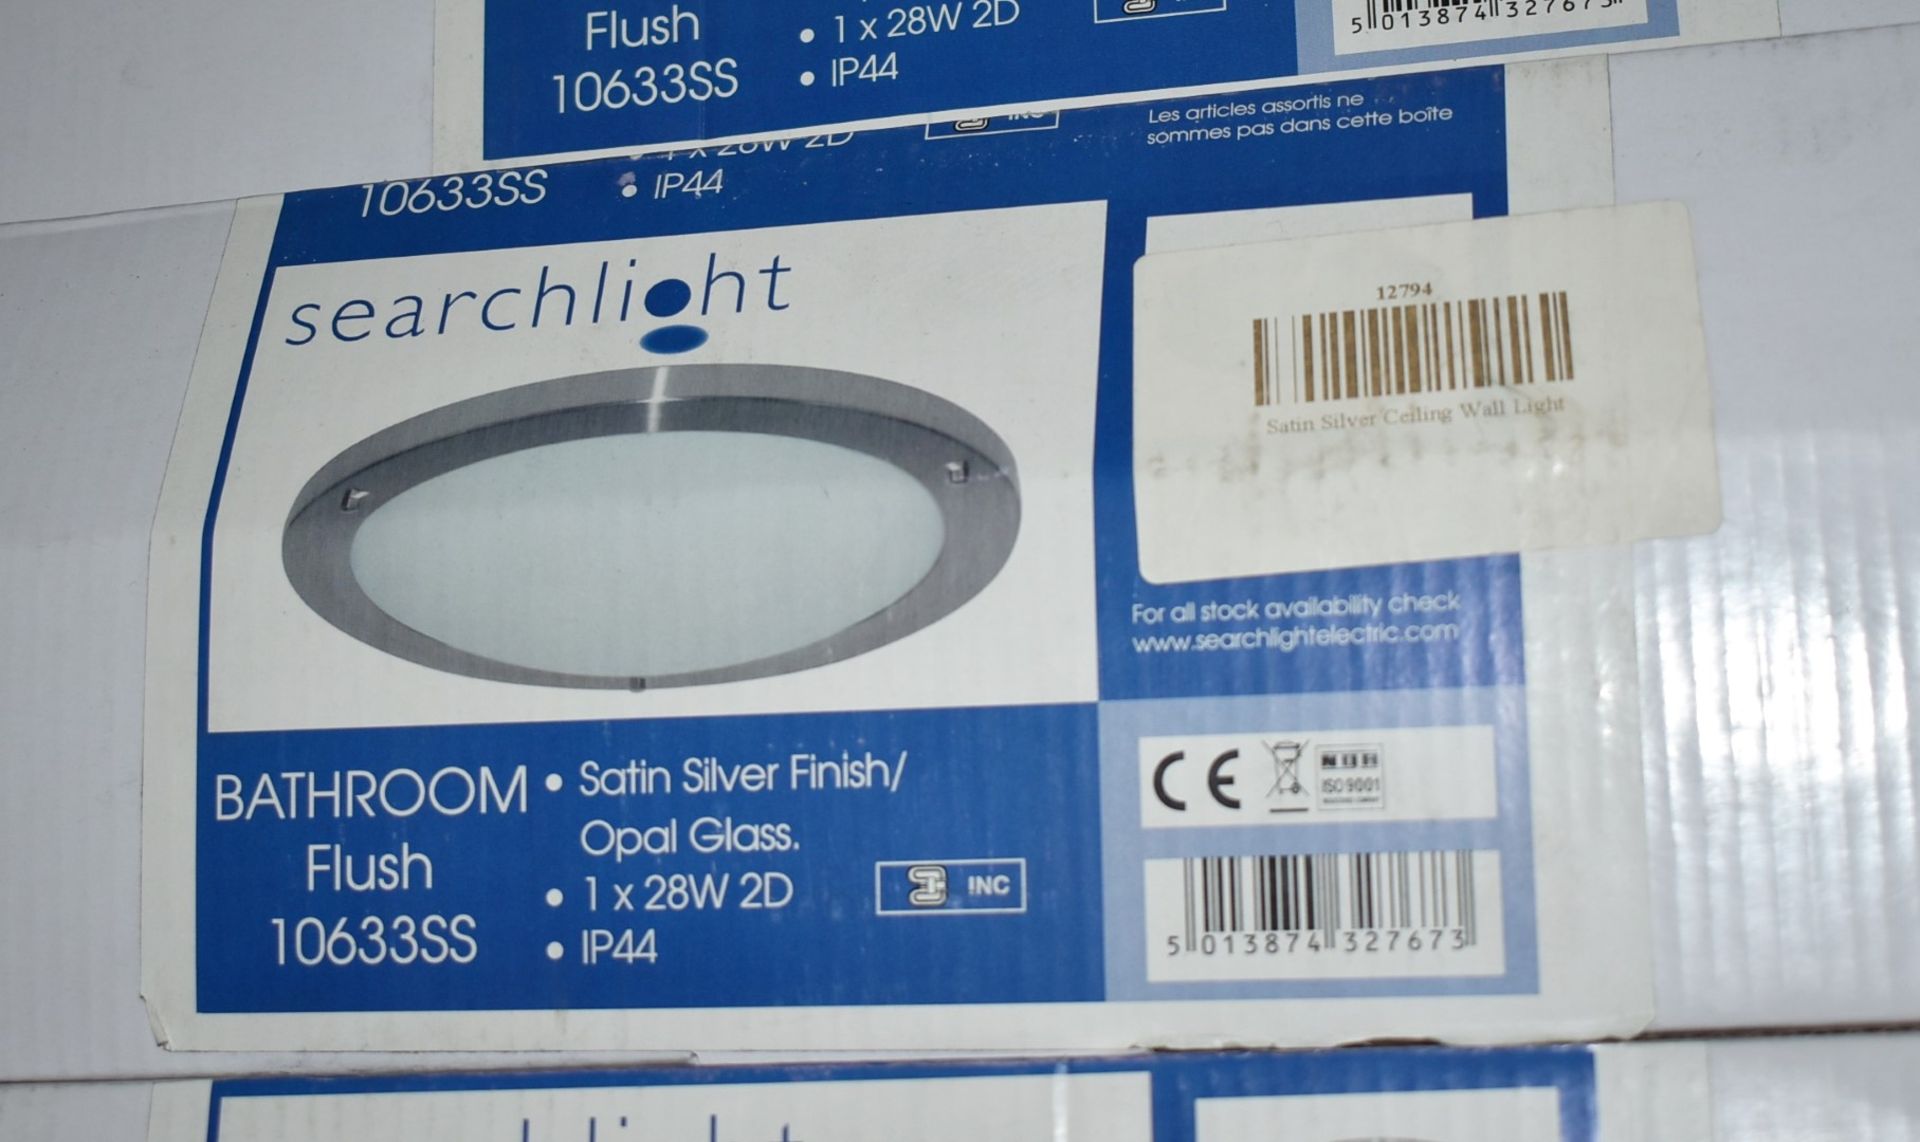 1 x Searchlight Bathroom Light Fitting - Flush Ceiling Light With Satin Silver Finish, Opal Glass - Image 2 of 2